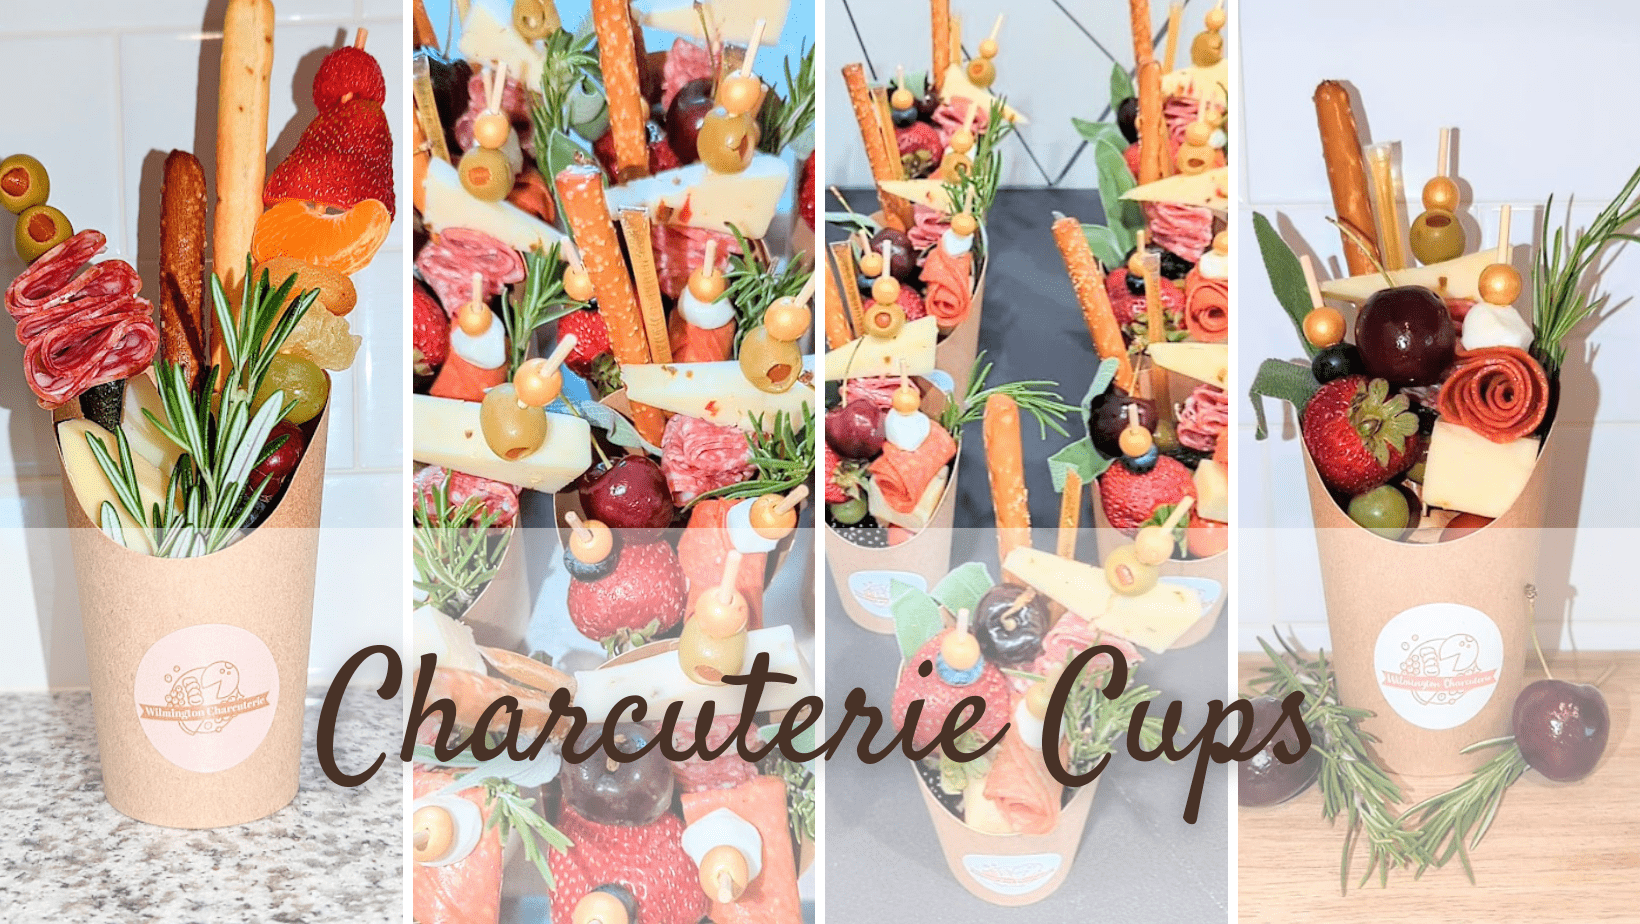 Cups - Putting the 'Cute' is Charcuterie! These adorable cups feature 2 artisan cheeses and 1 dry cured meat option and are stuffed with all the delicious accoutrements of a charcuterie board. Perfect for large crowds that want the convenience of a personal charcuterie board, while being cute and portable!